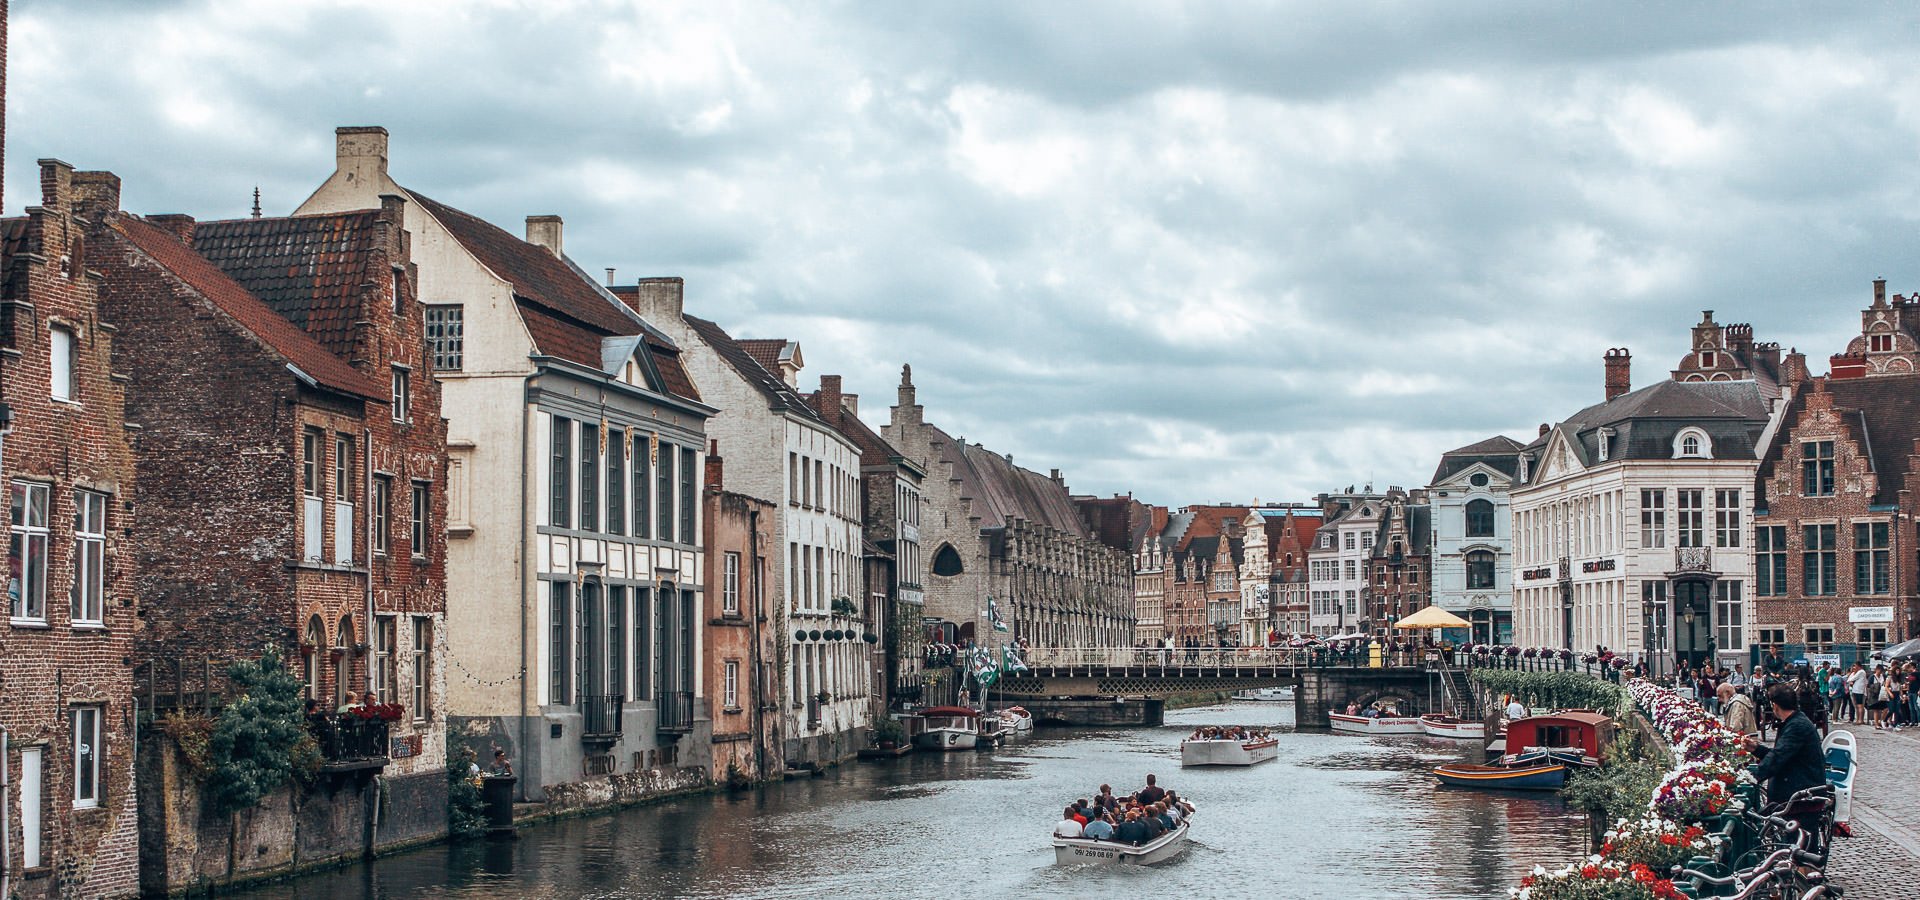 The Undiscovered Flemish Jewel: A Day Trip To Ghent | 3 days in lisbon 4